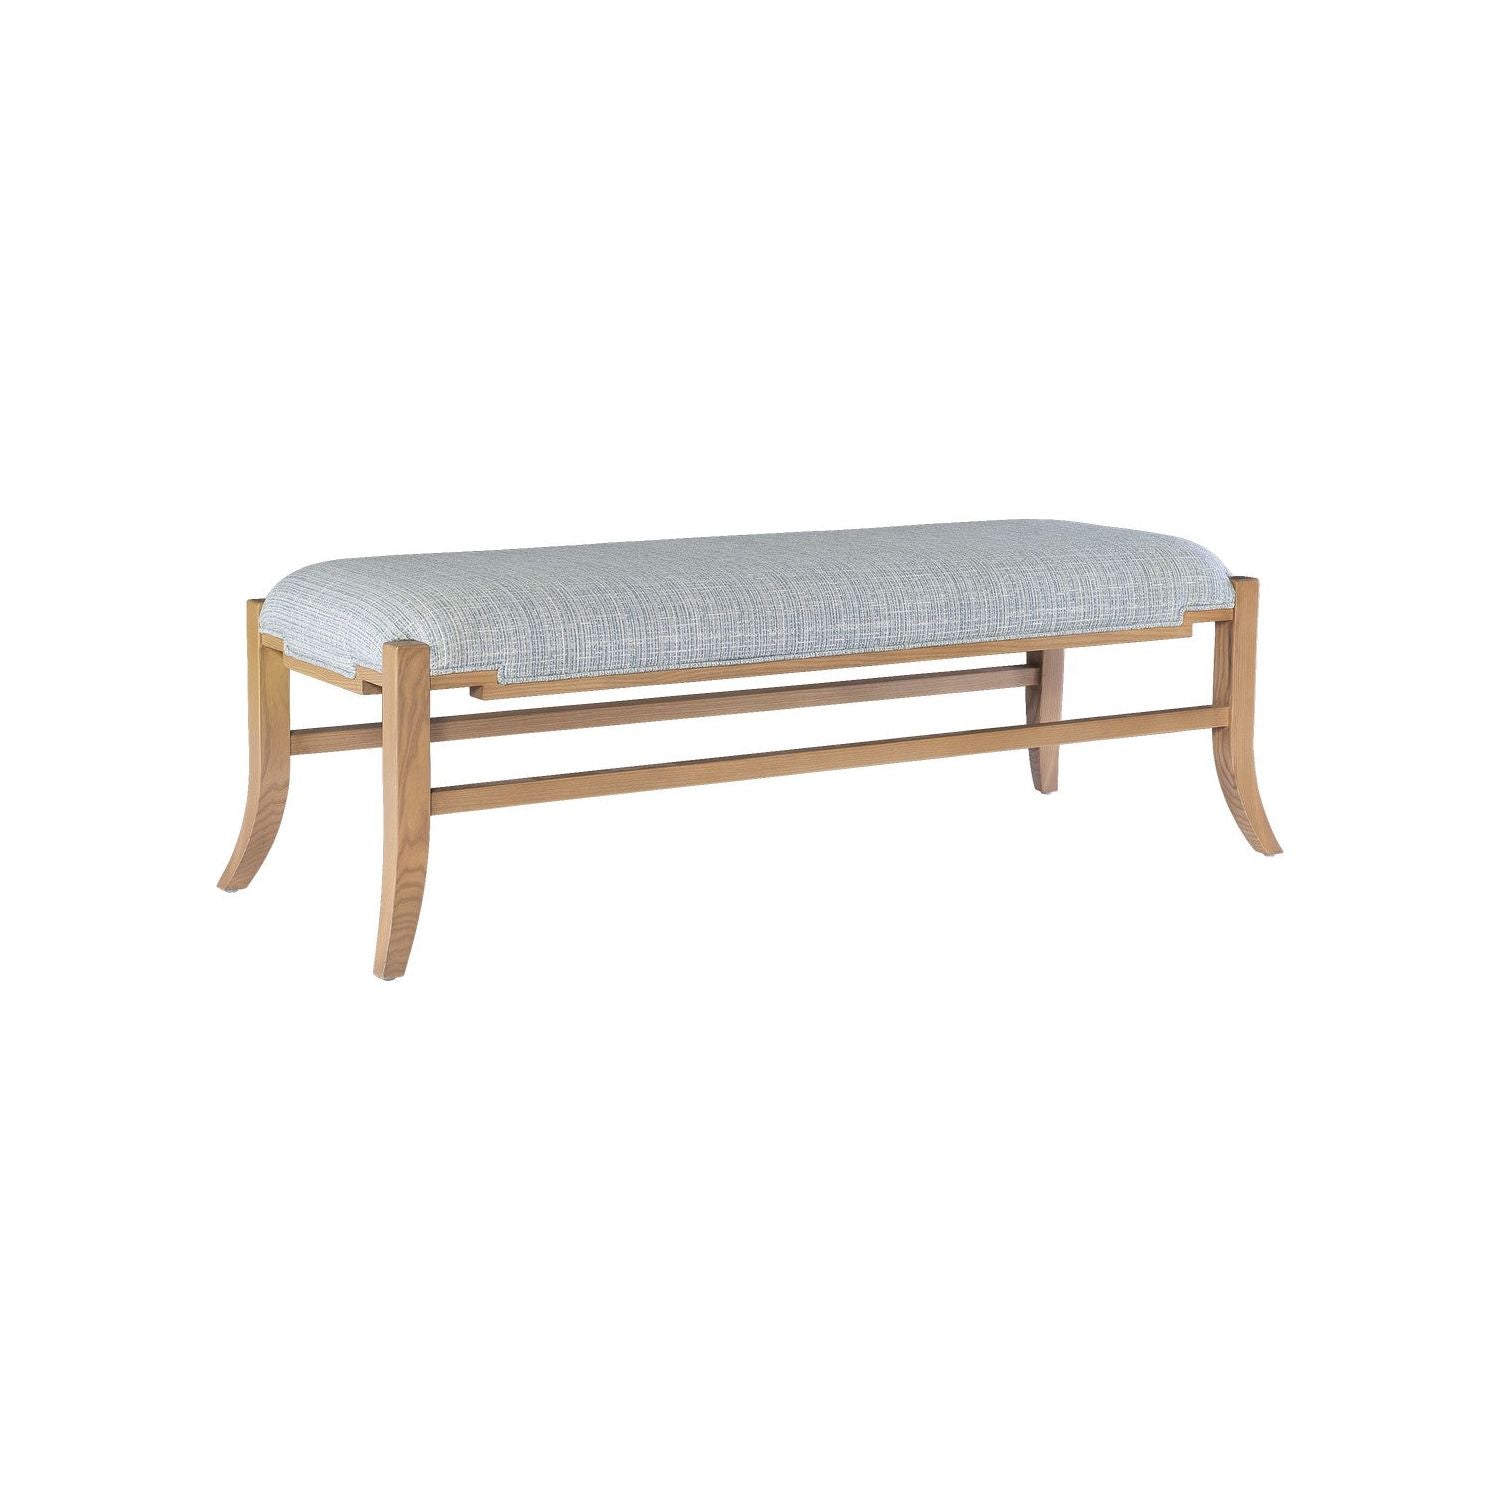 Currey and Company - 7000-1002 - Bench - Blonde Ash Wood